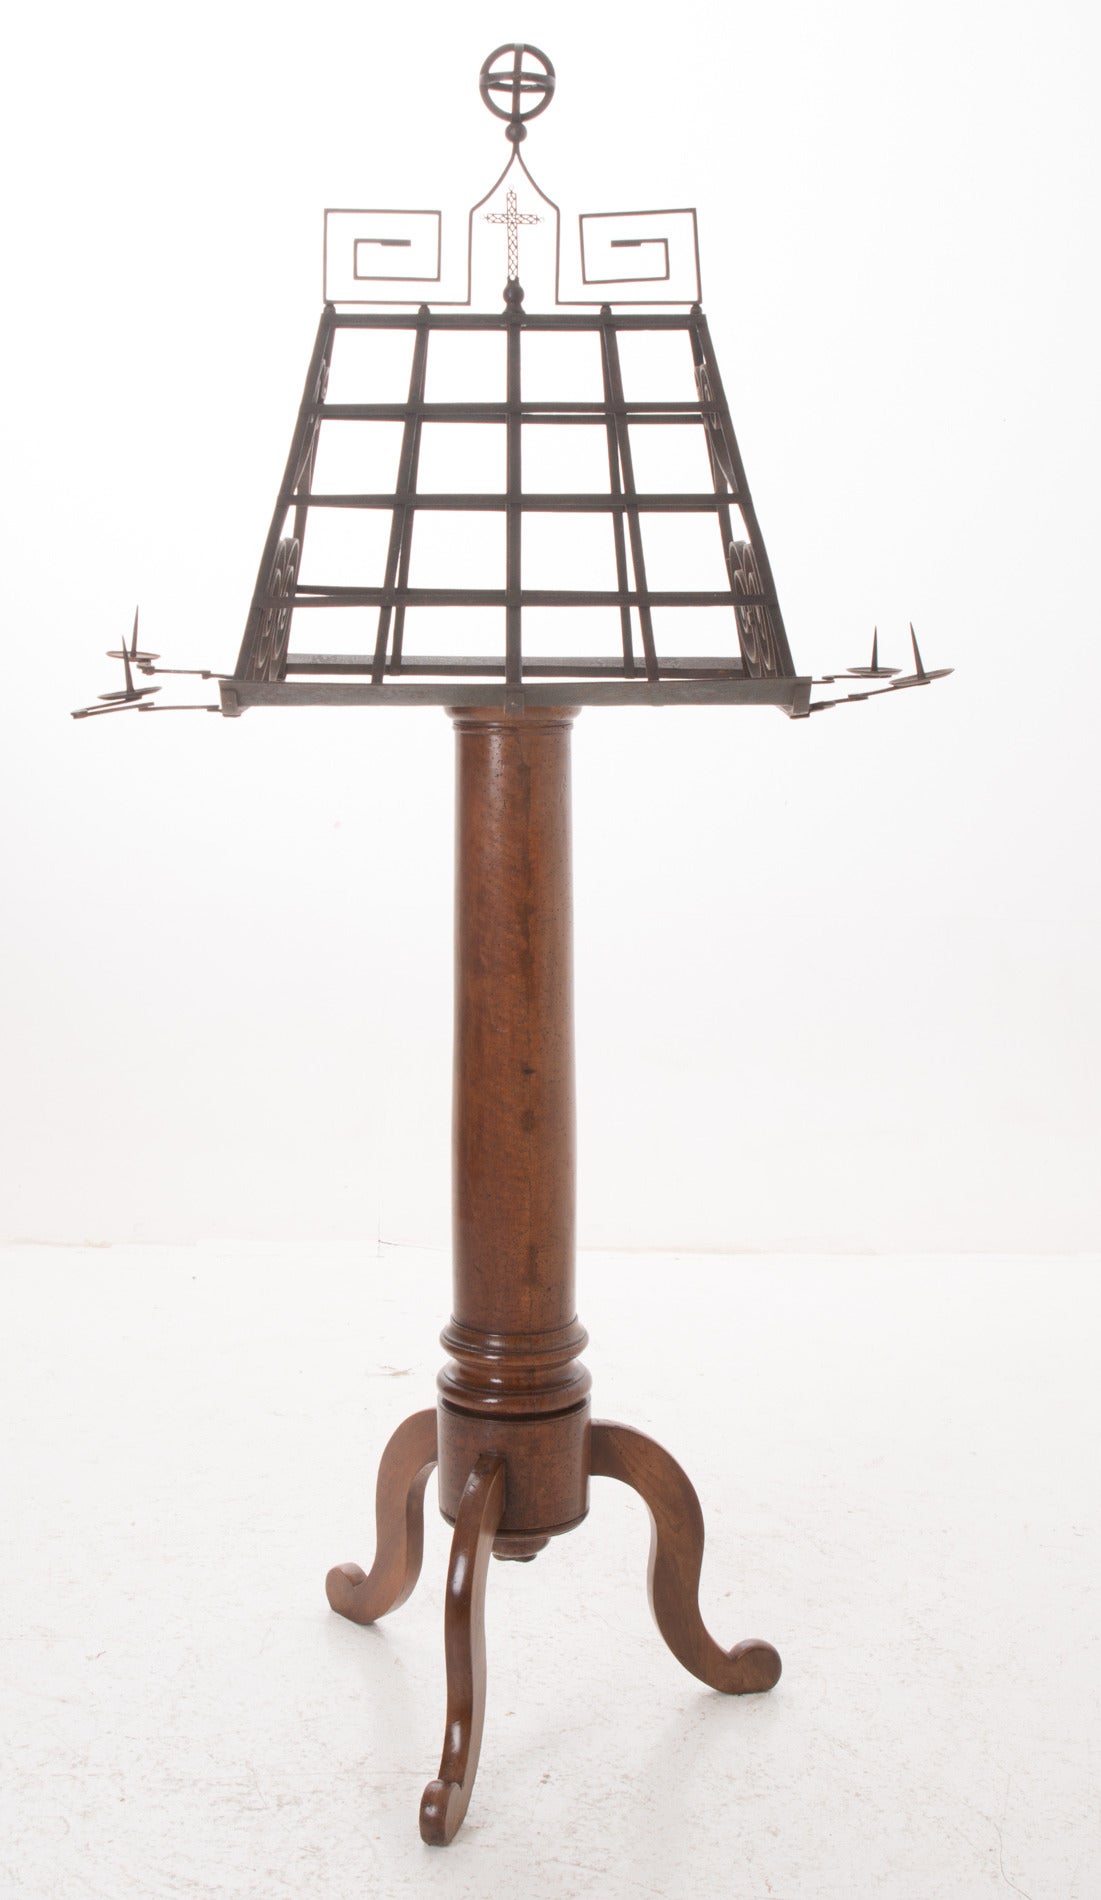 A top quality religious lectern from a church from which a bible was read from. This is a stunning forged iron top has scrolls, Greek keys and crosses with four extending candleholders! The turned mahogany base is a healthy size and ends with three